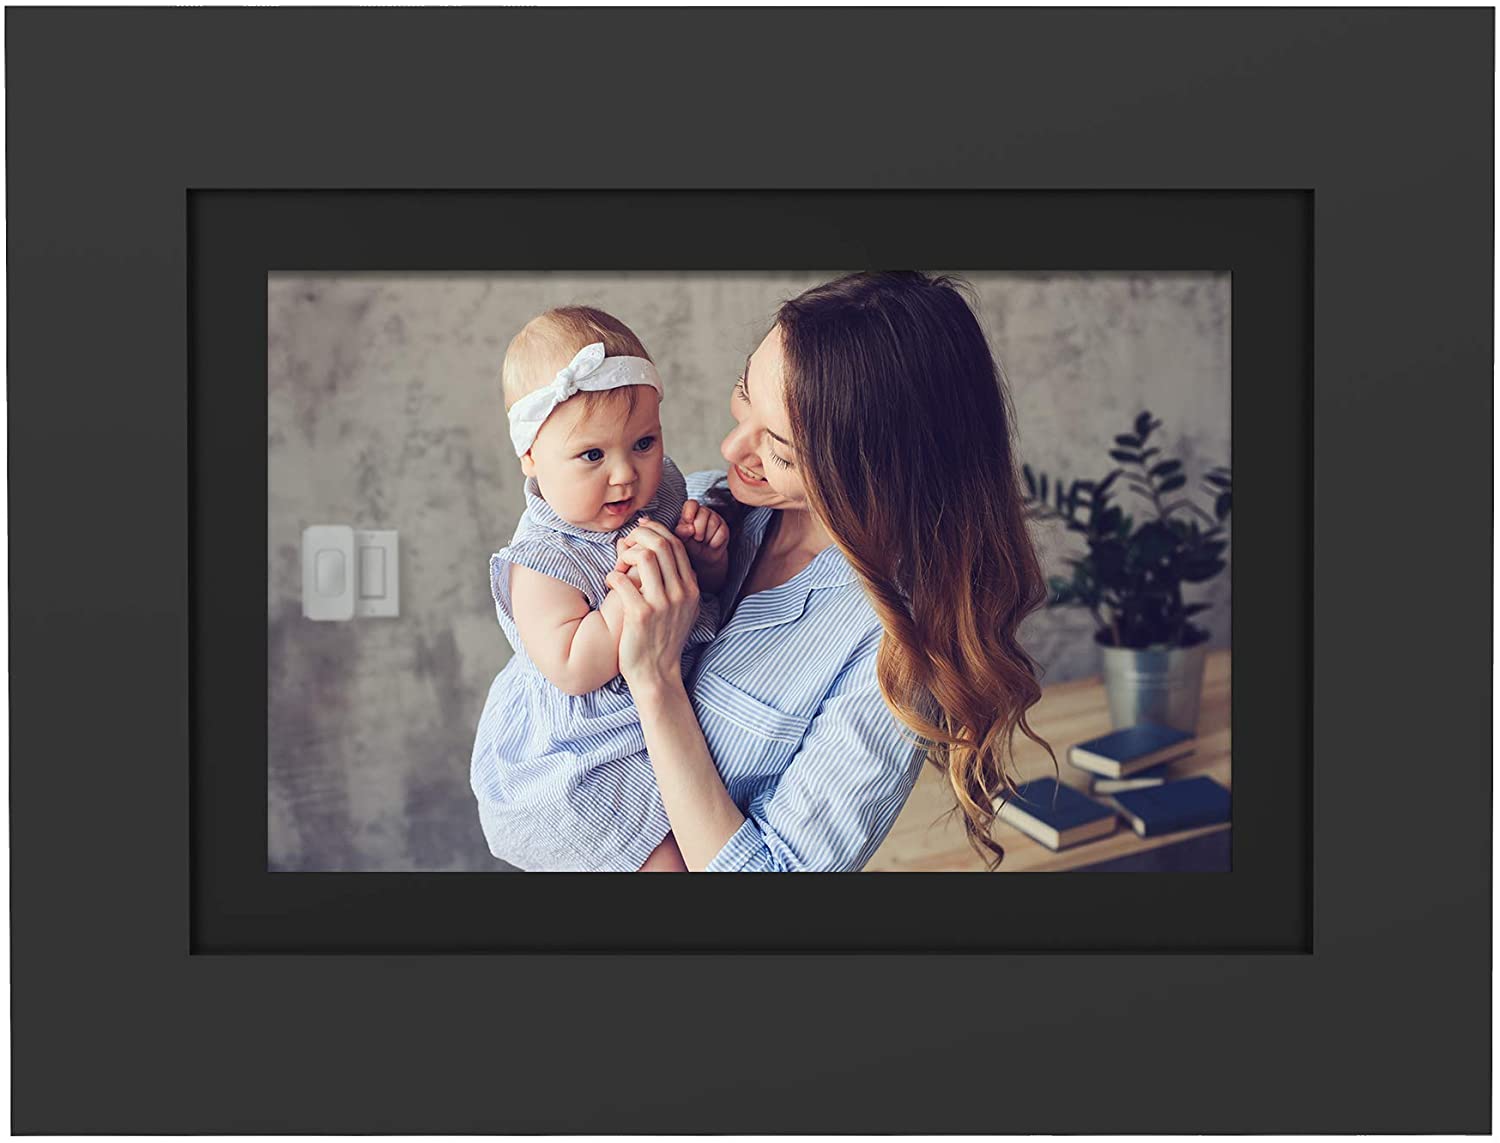 Photoshare Digital Picture Frame Render Cropped